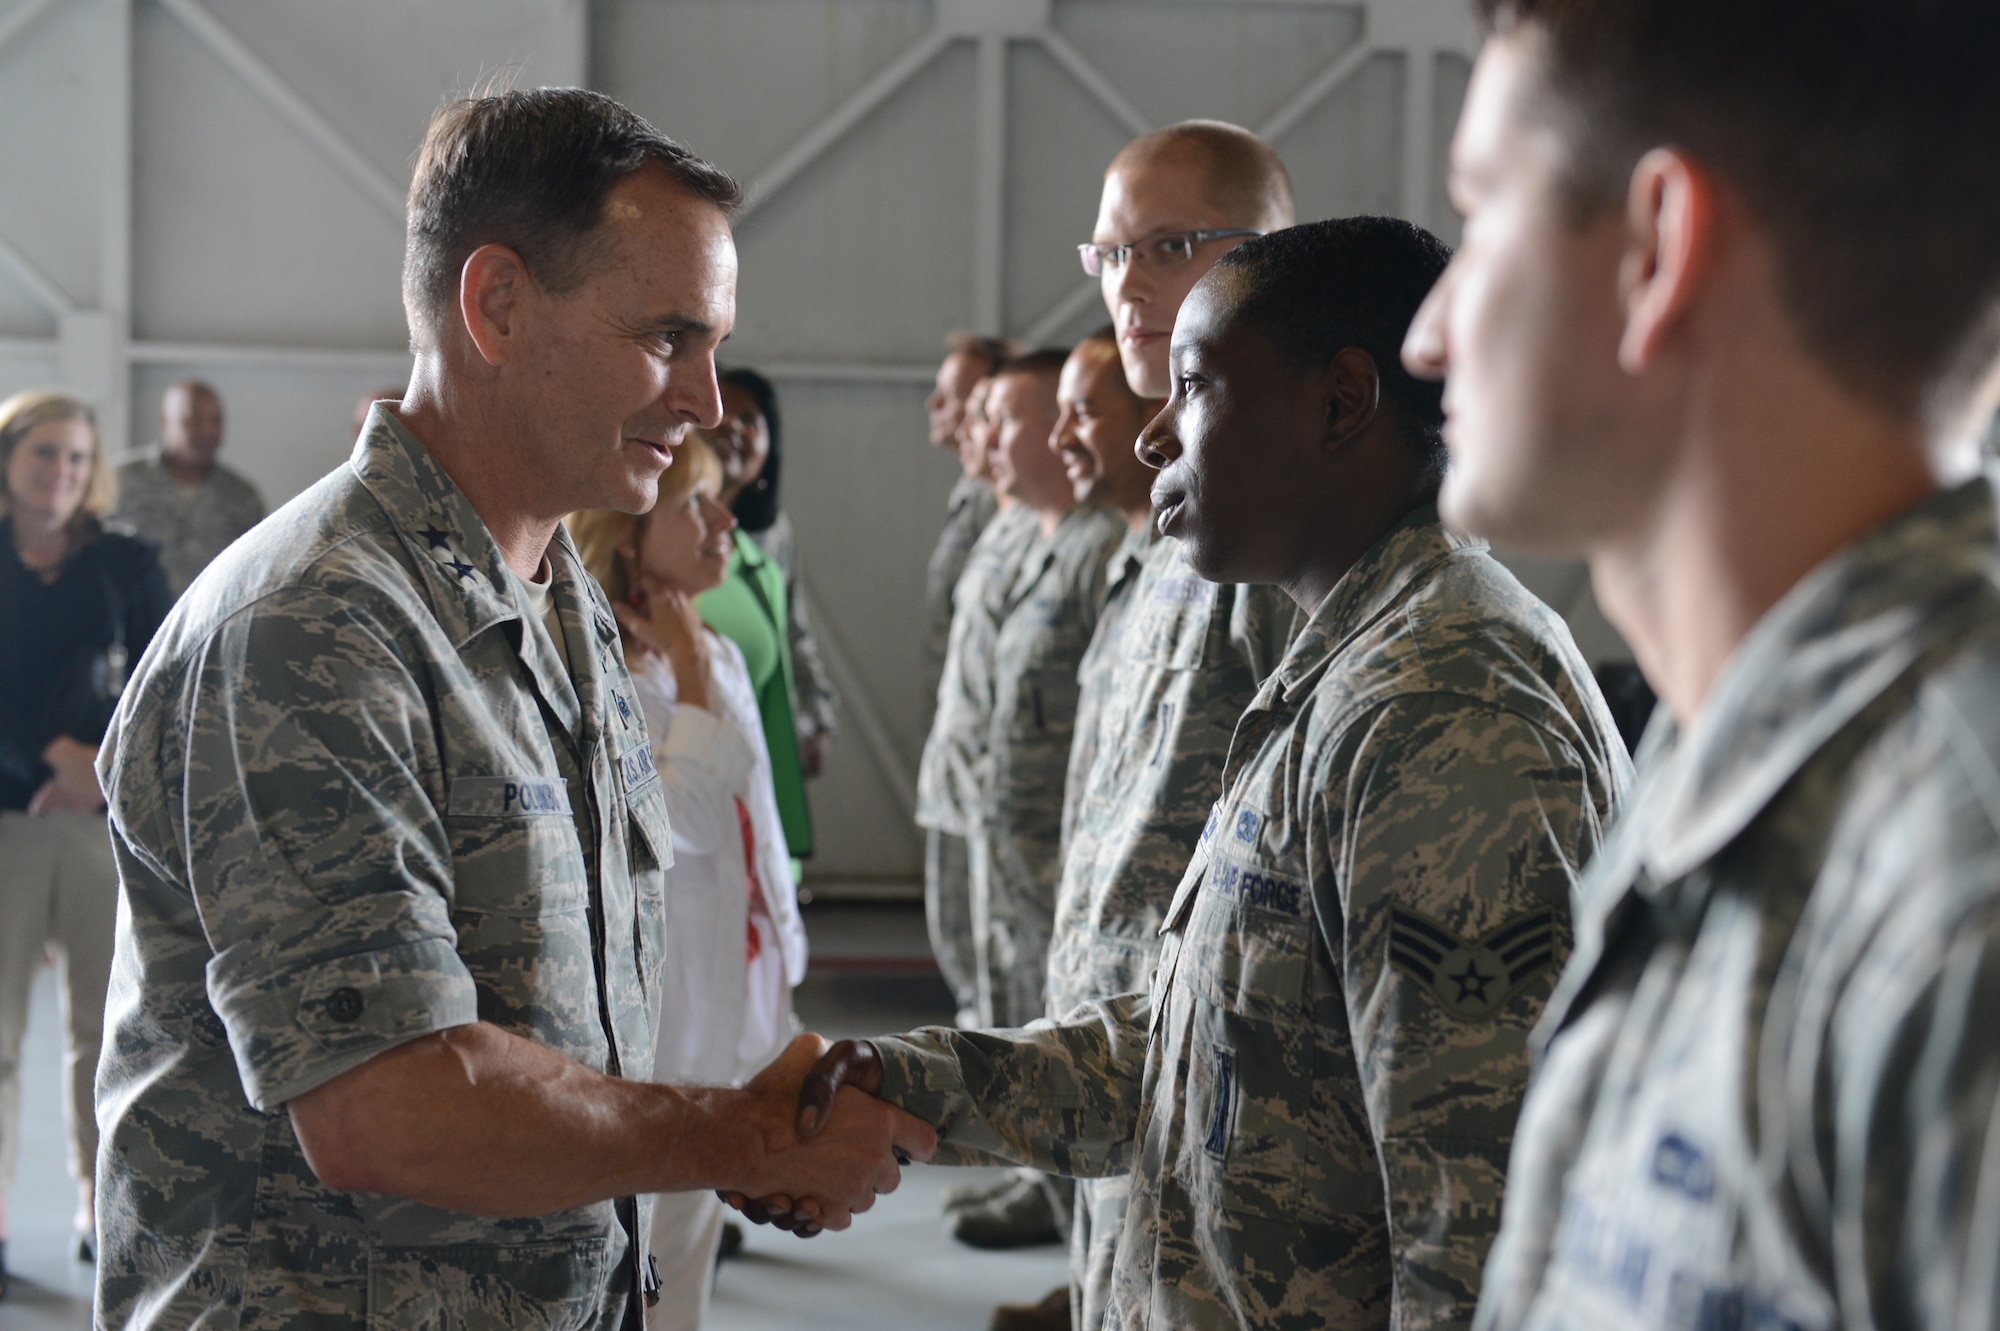 Maj. Gen. Jake Polumbo, 9th Air Force commander, shakes hands and speaks to members of the 20th Maintenance Group at the weapons and standardization facility during a tour of 20th Fighter Wing at Shaw Air Force Base, S.C., July 1, 2013. During the tour, Polumbo also visited other facilities like the McElveen Resource Center, the base dorms and the Chief Master Sgt. Emerson Williams Dining Facility. (U.S. Air Force photo by Airman 1st Class Krystal M. Jeffers/Released)